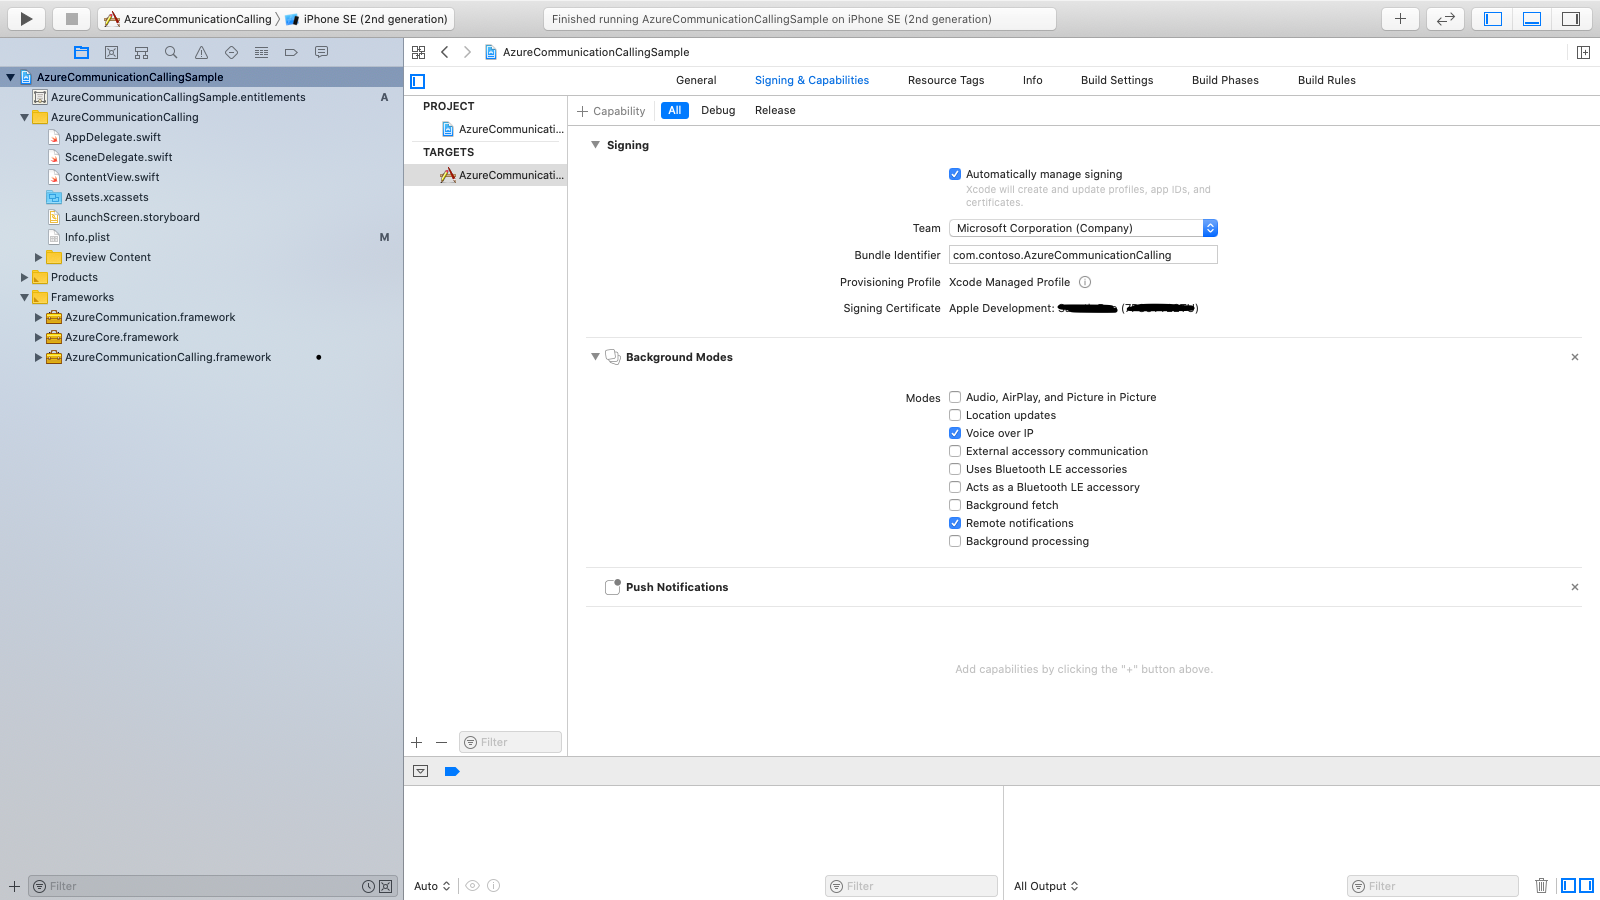 Screenshot that shows how to add capabilities in Xcode.